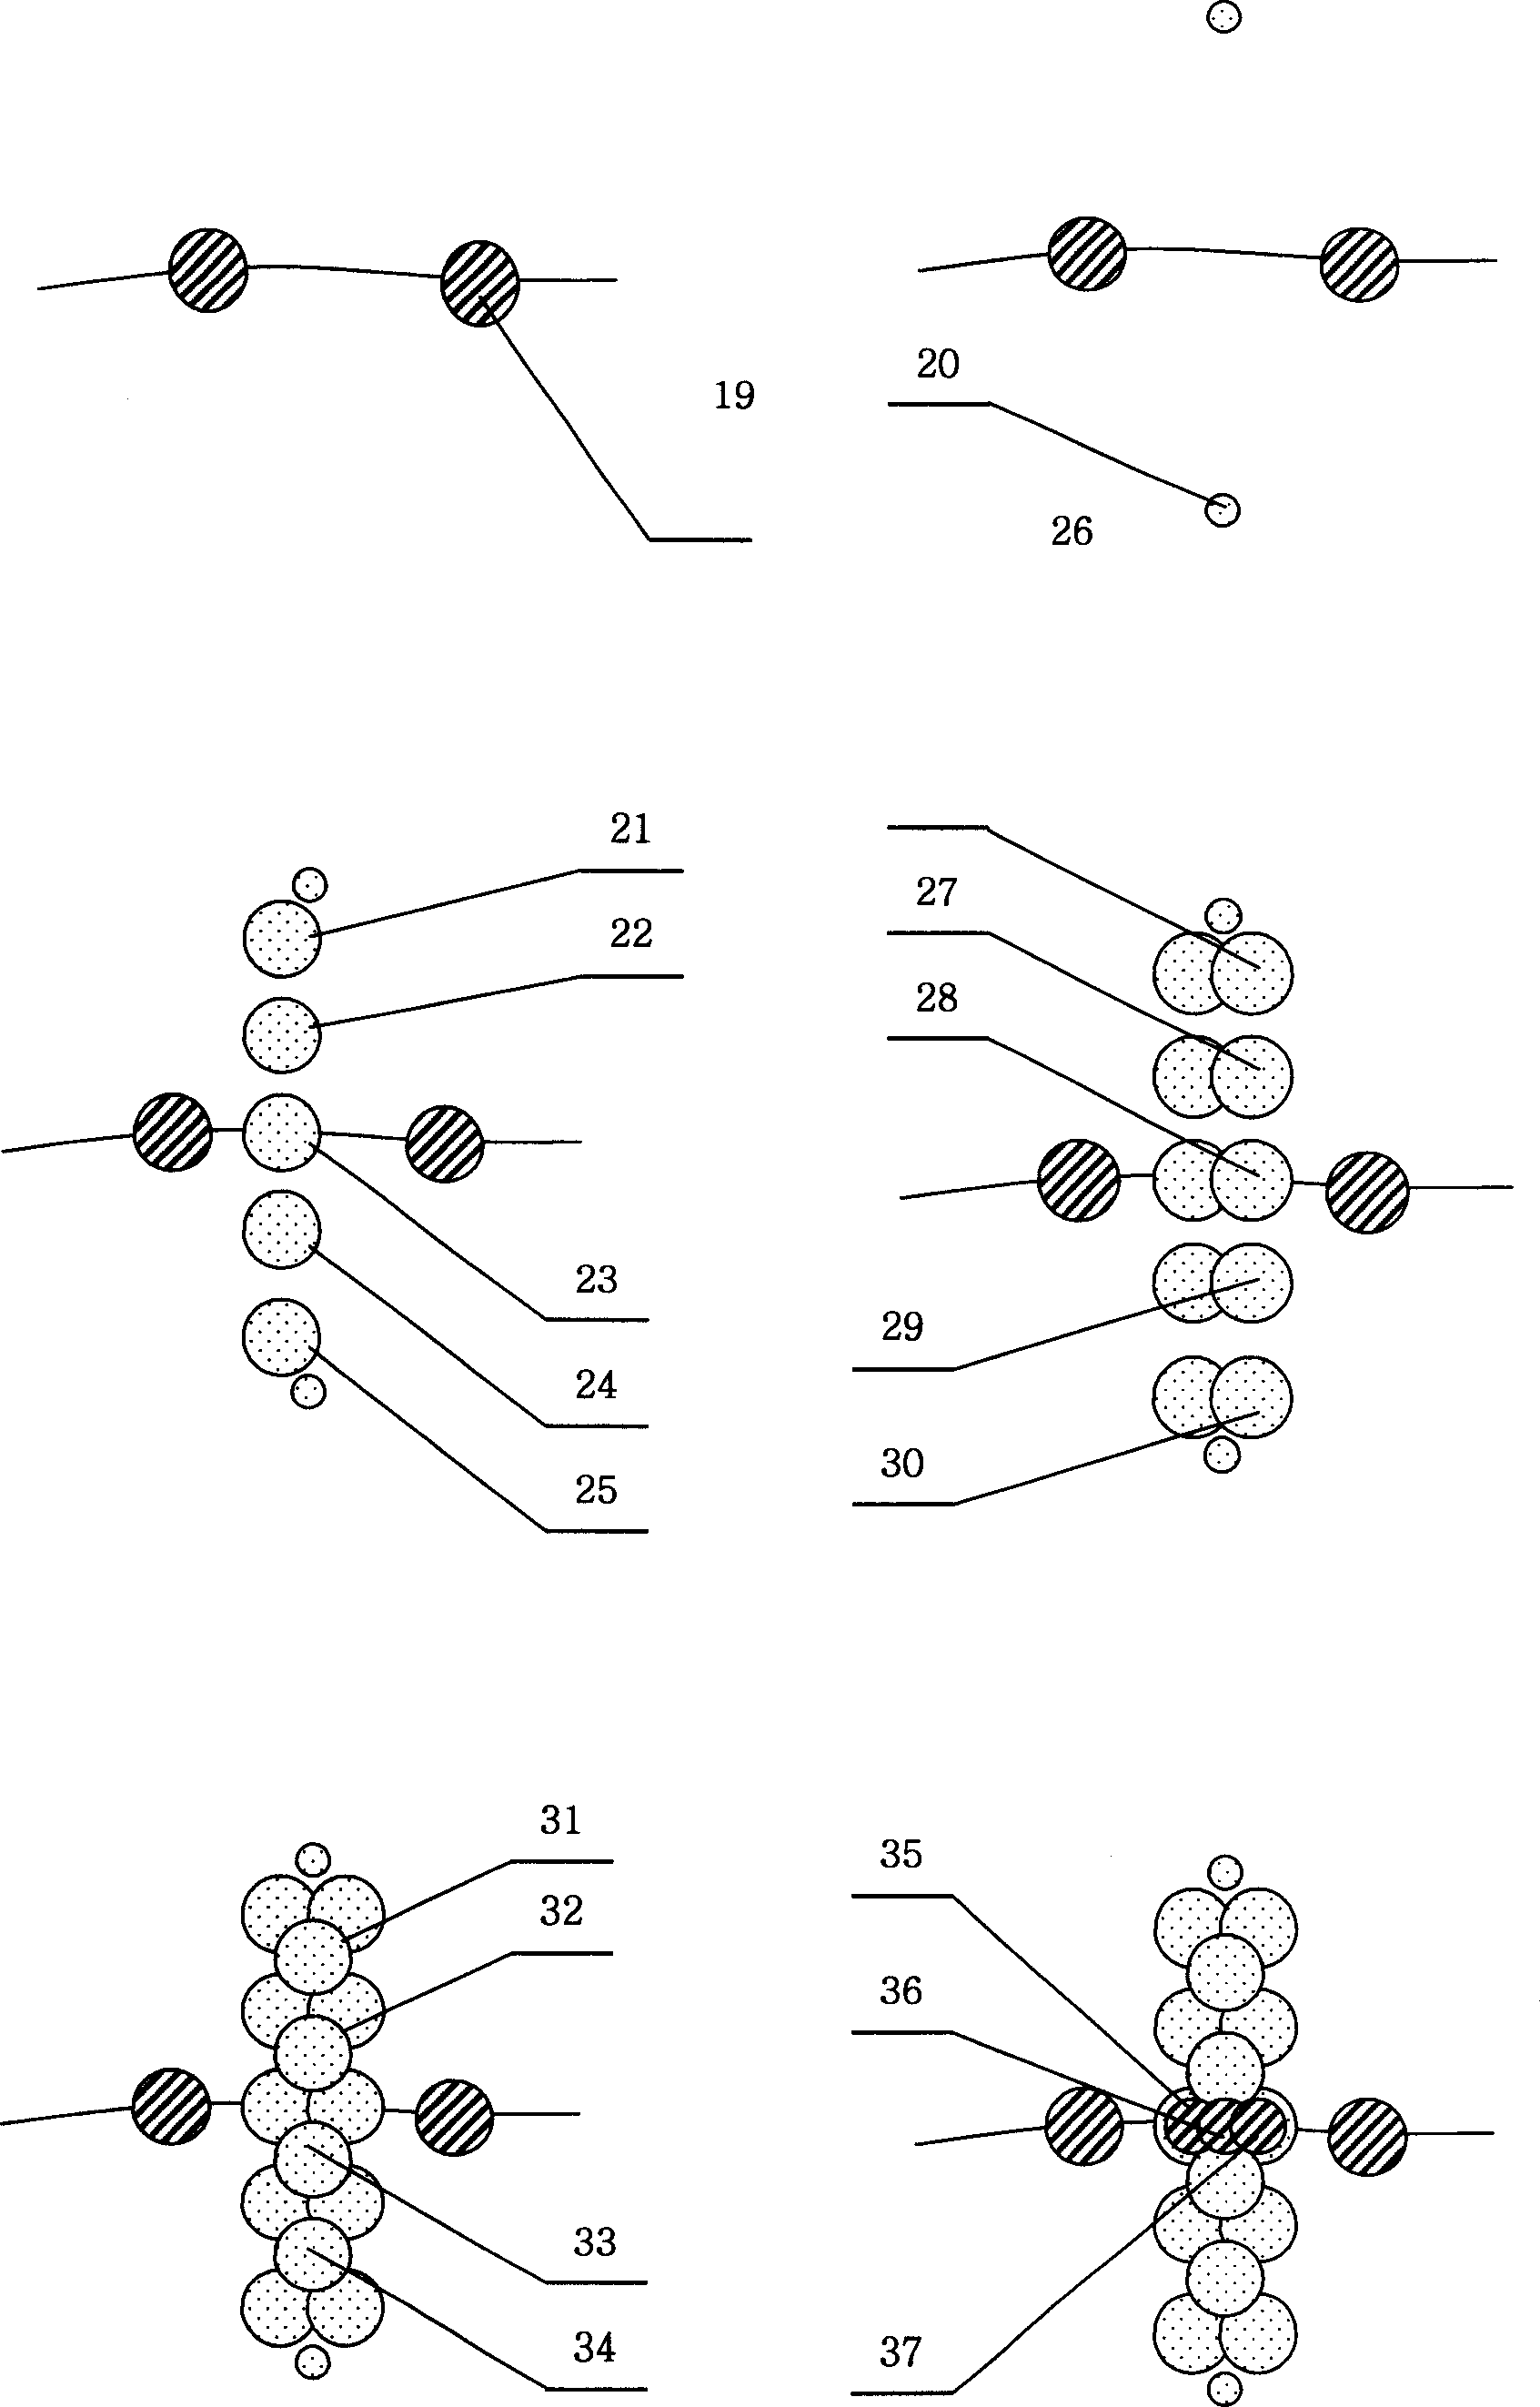 Parts for repairing crack of metal surface and method therefore